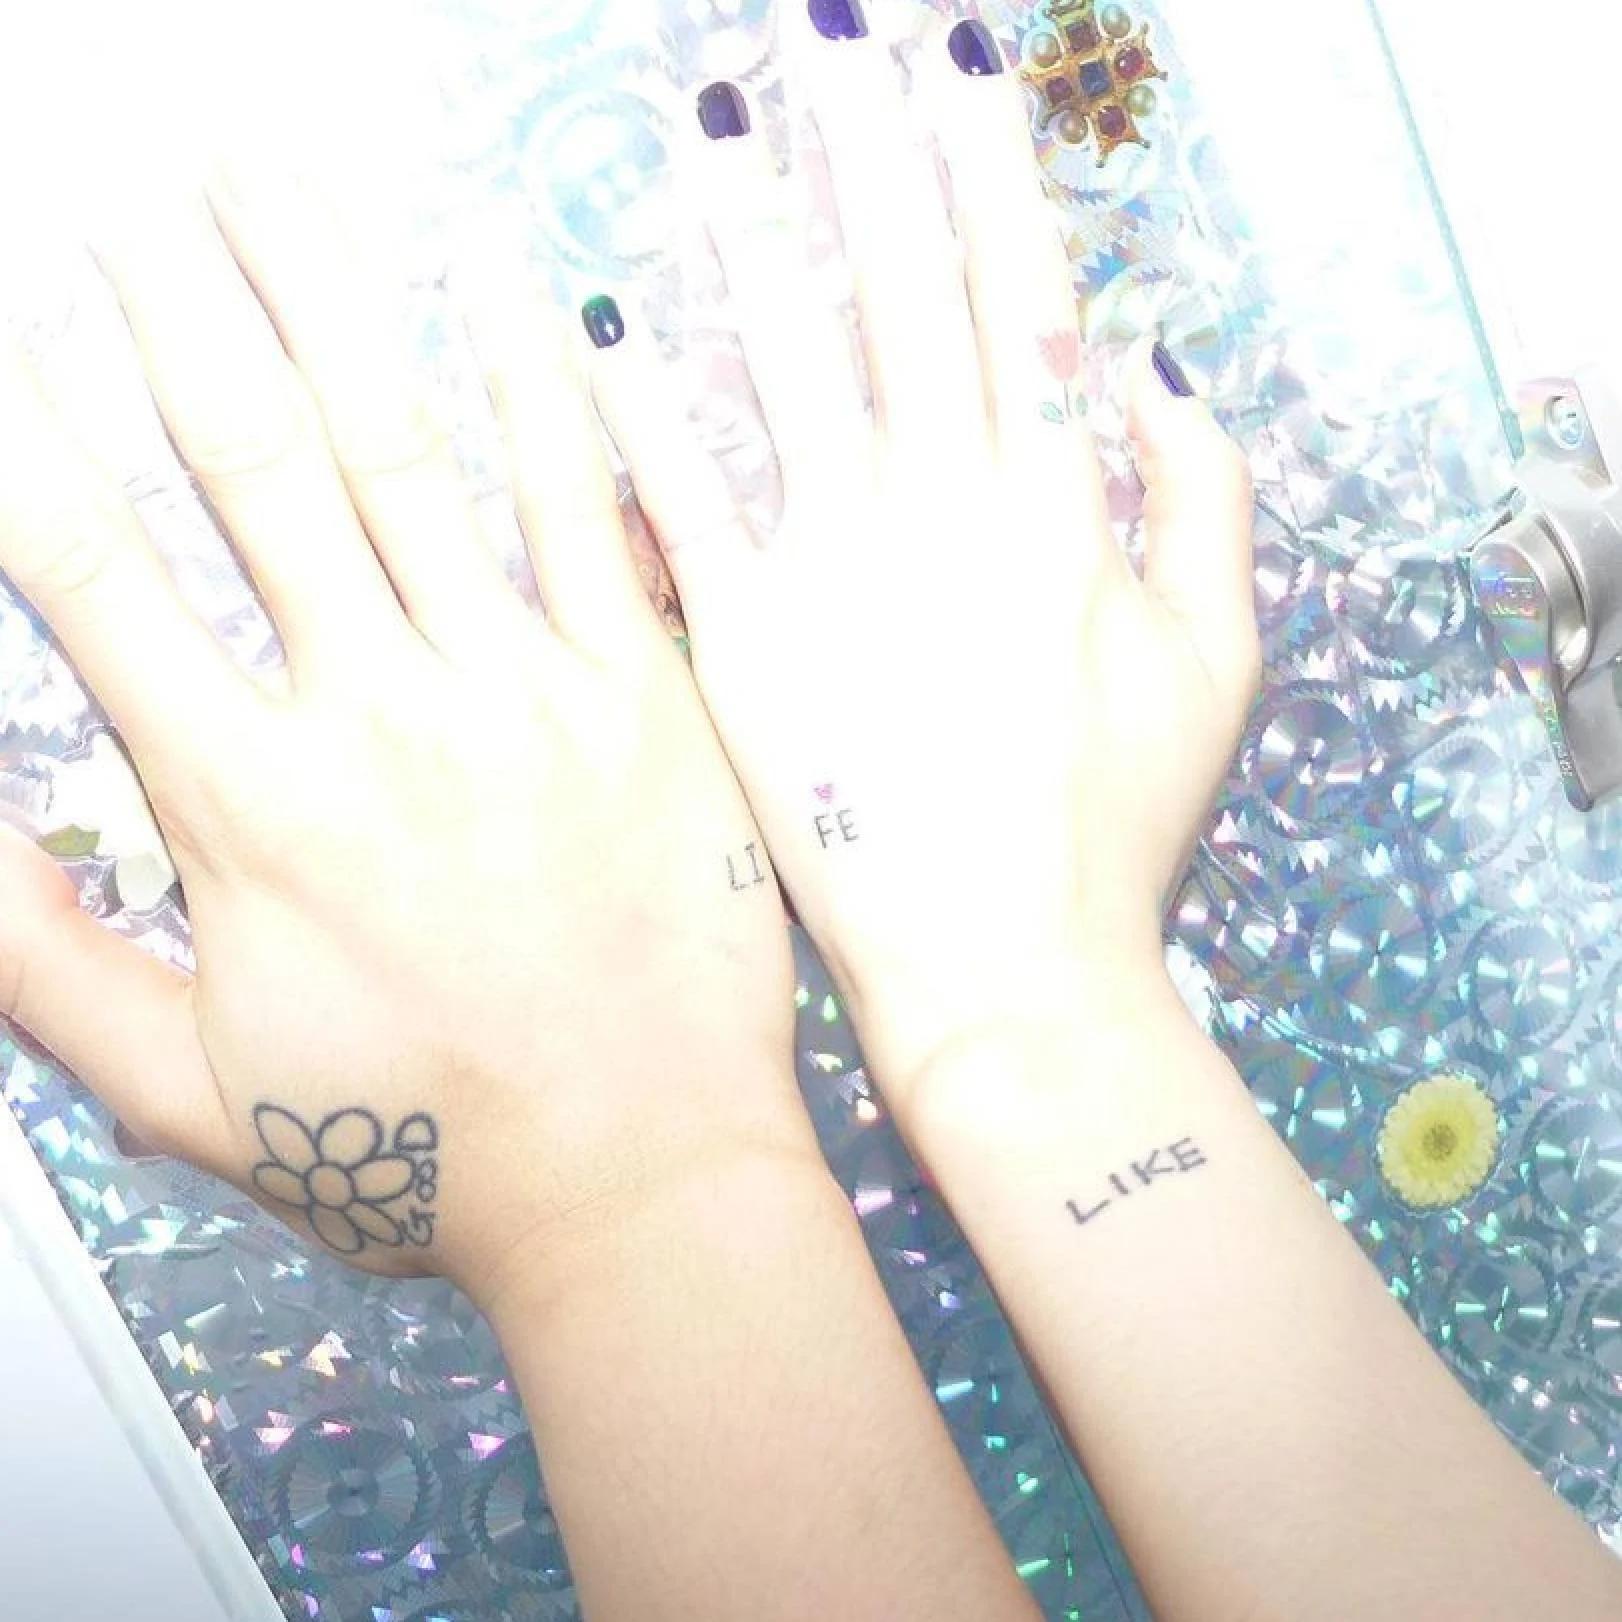 Hyuna also has a cute matching tattoo with her then-fiance Dawn-  his right hand says “LI”, while her left hand says “FE”, spelling out the word “life” when their hands are placed side-by-side